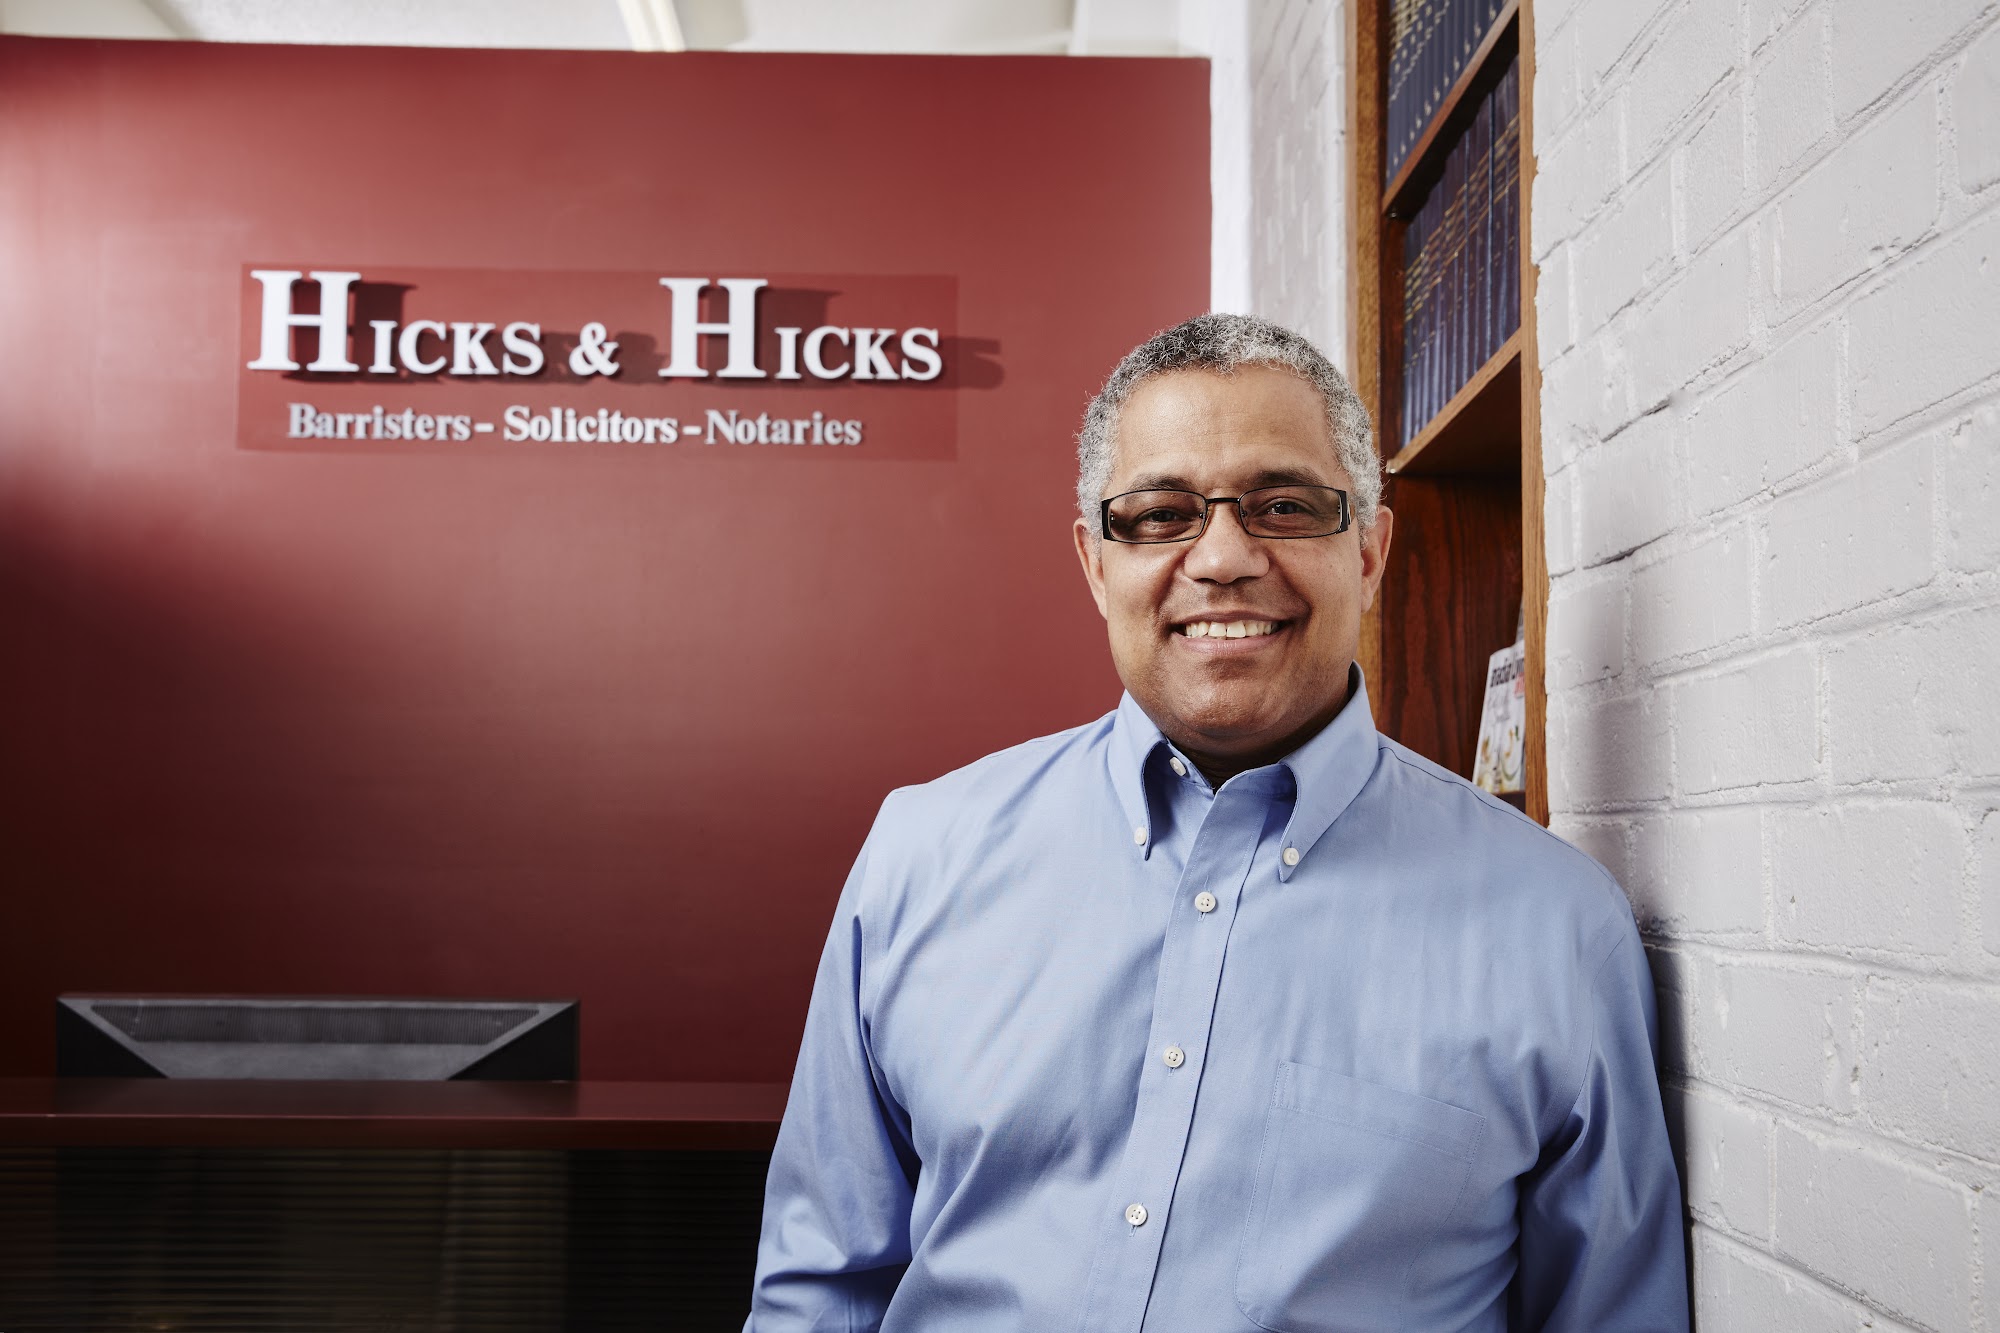 Hicks & Hicks Professional Corporation, Barristers And Solicitors 554 10th Ave, Hanover Ontario N4N 2P4